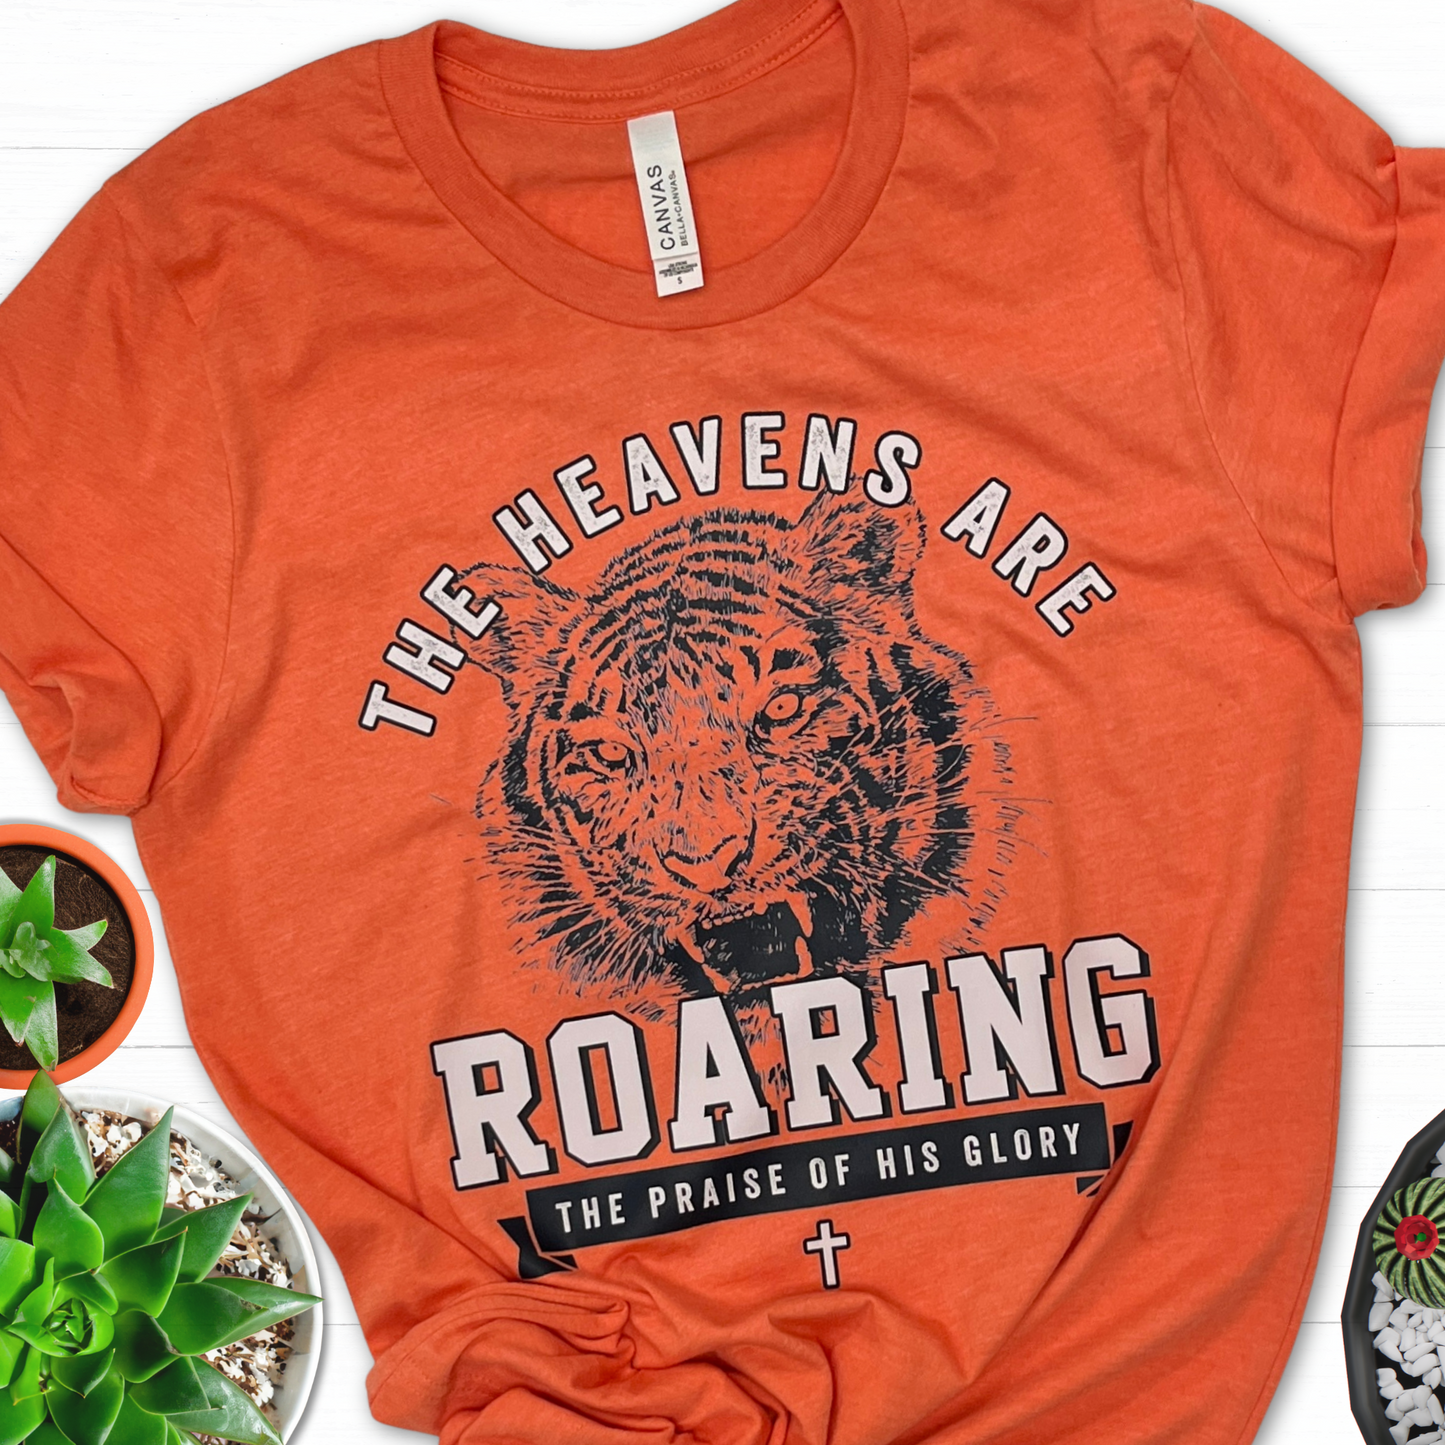 The heavens are roaring Graphic Tee